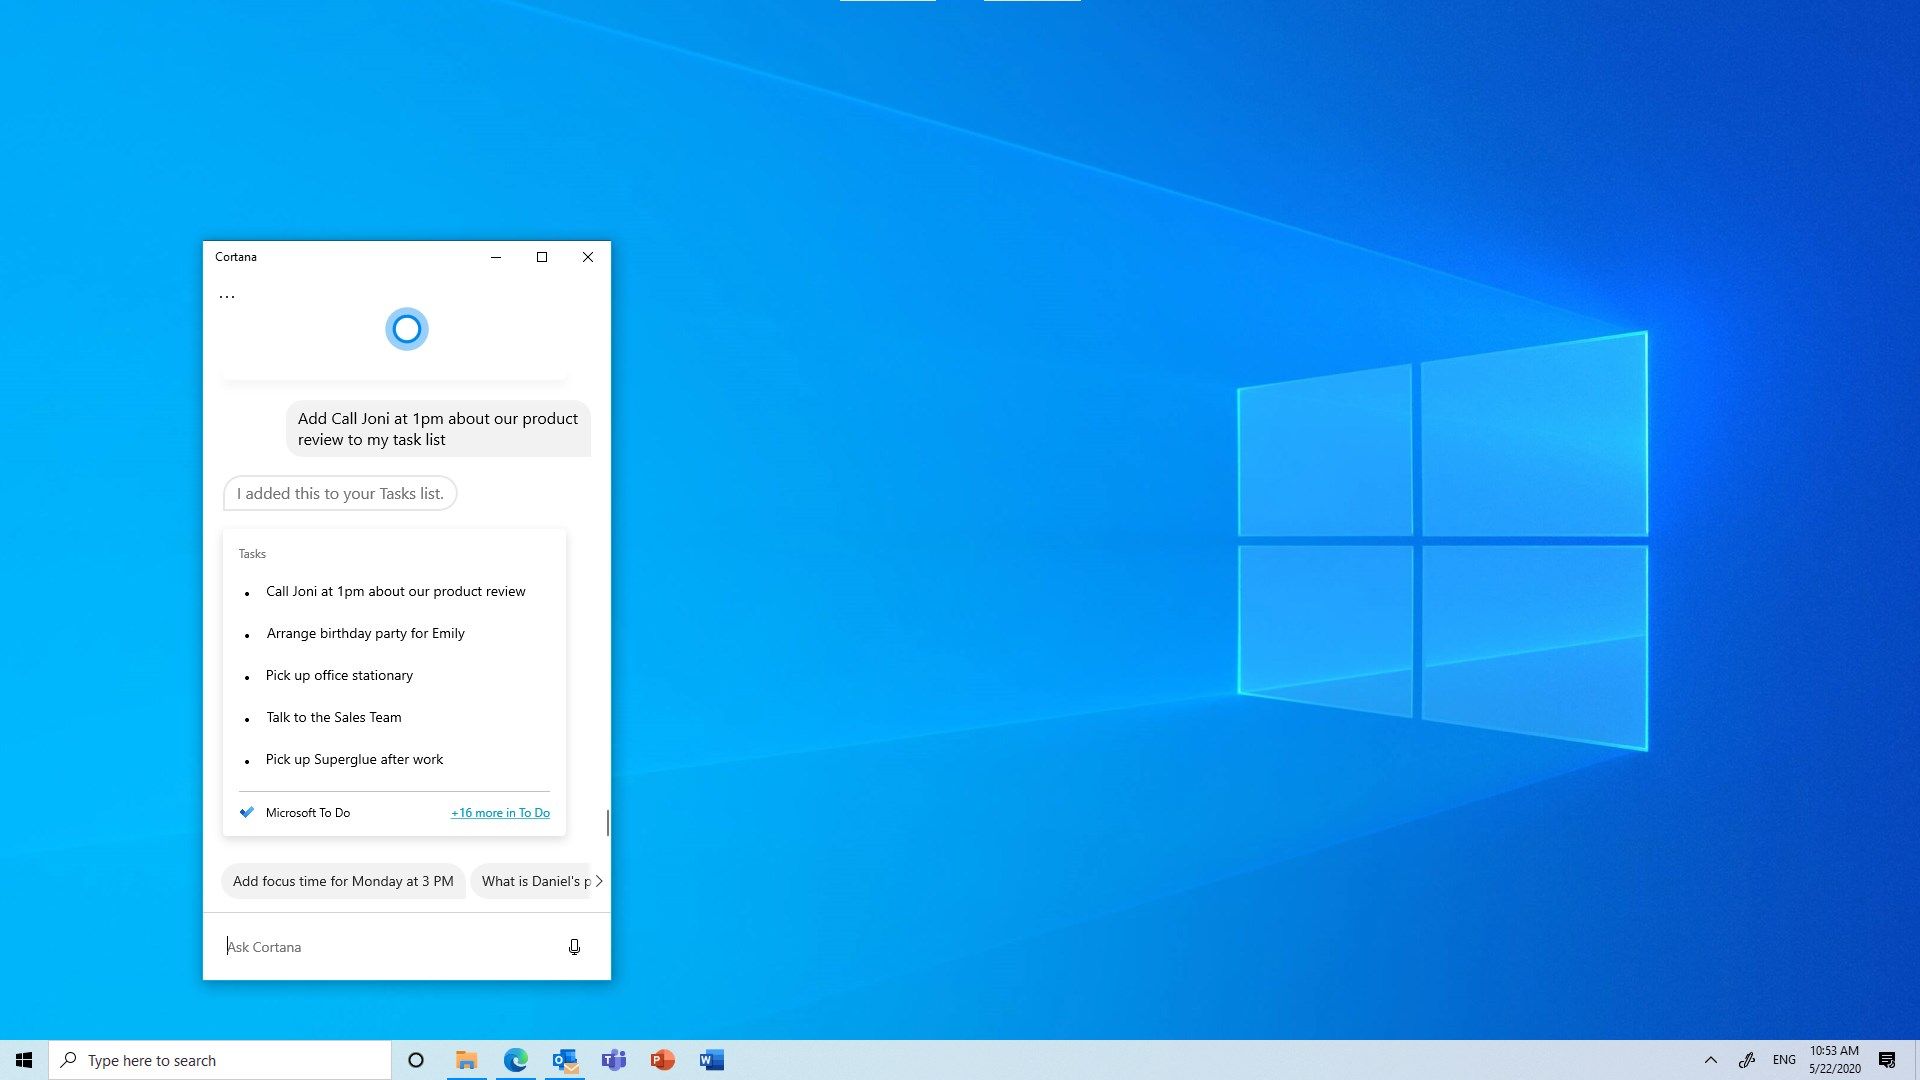 Cortana can help you create, modify and add new tasks to your lists.